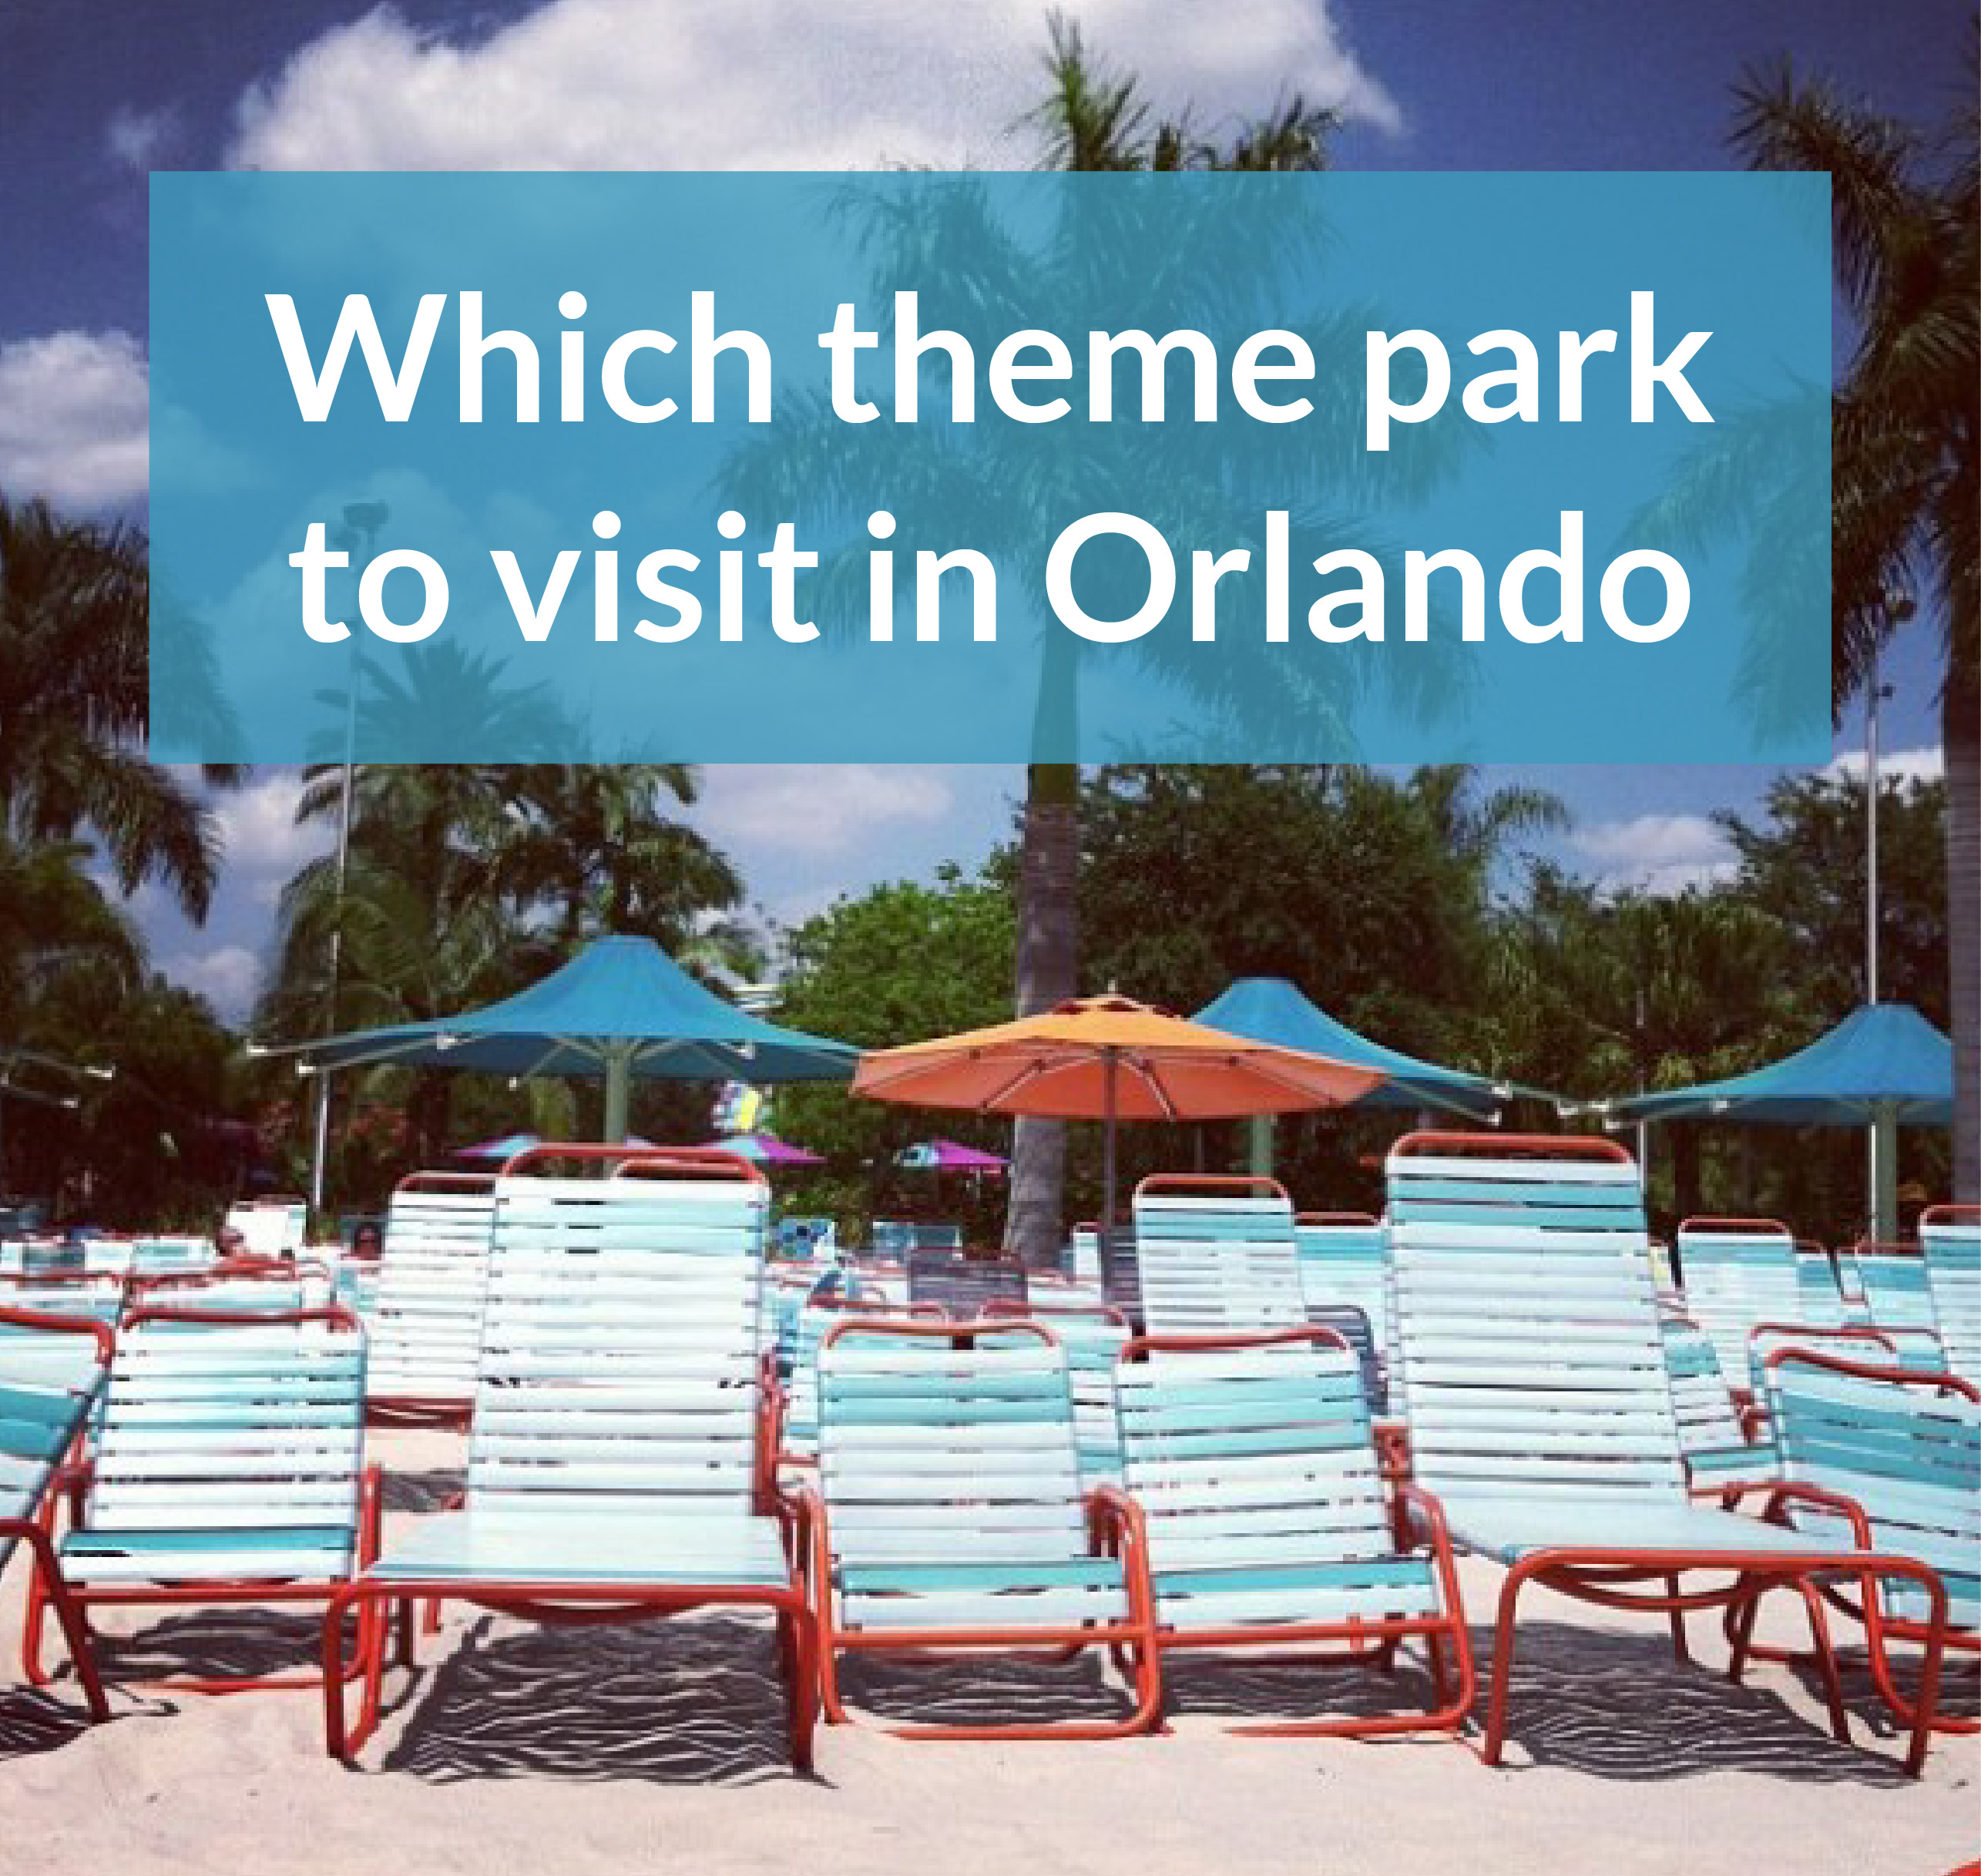 Which theme park to visit in Orlando